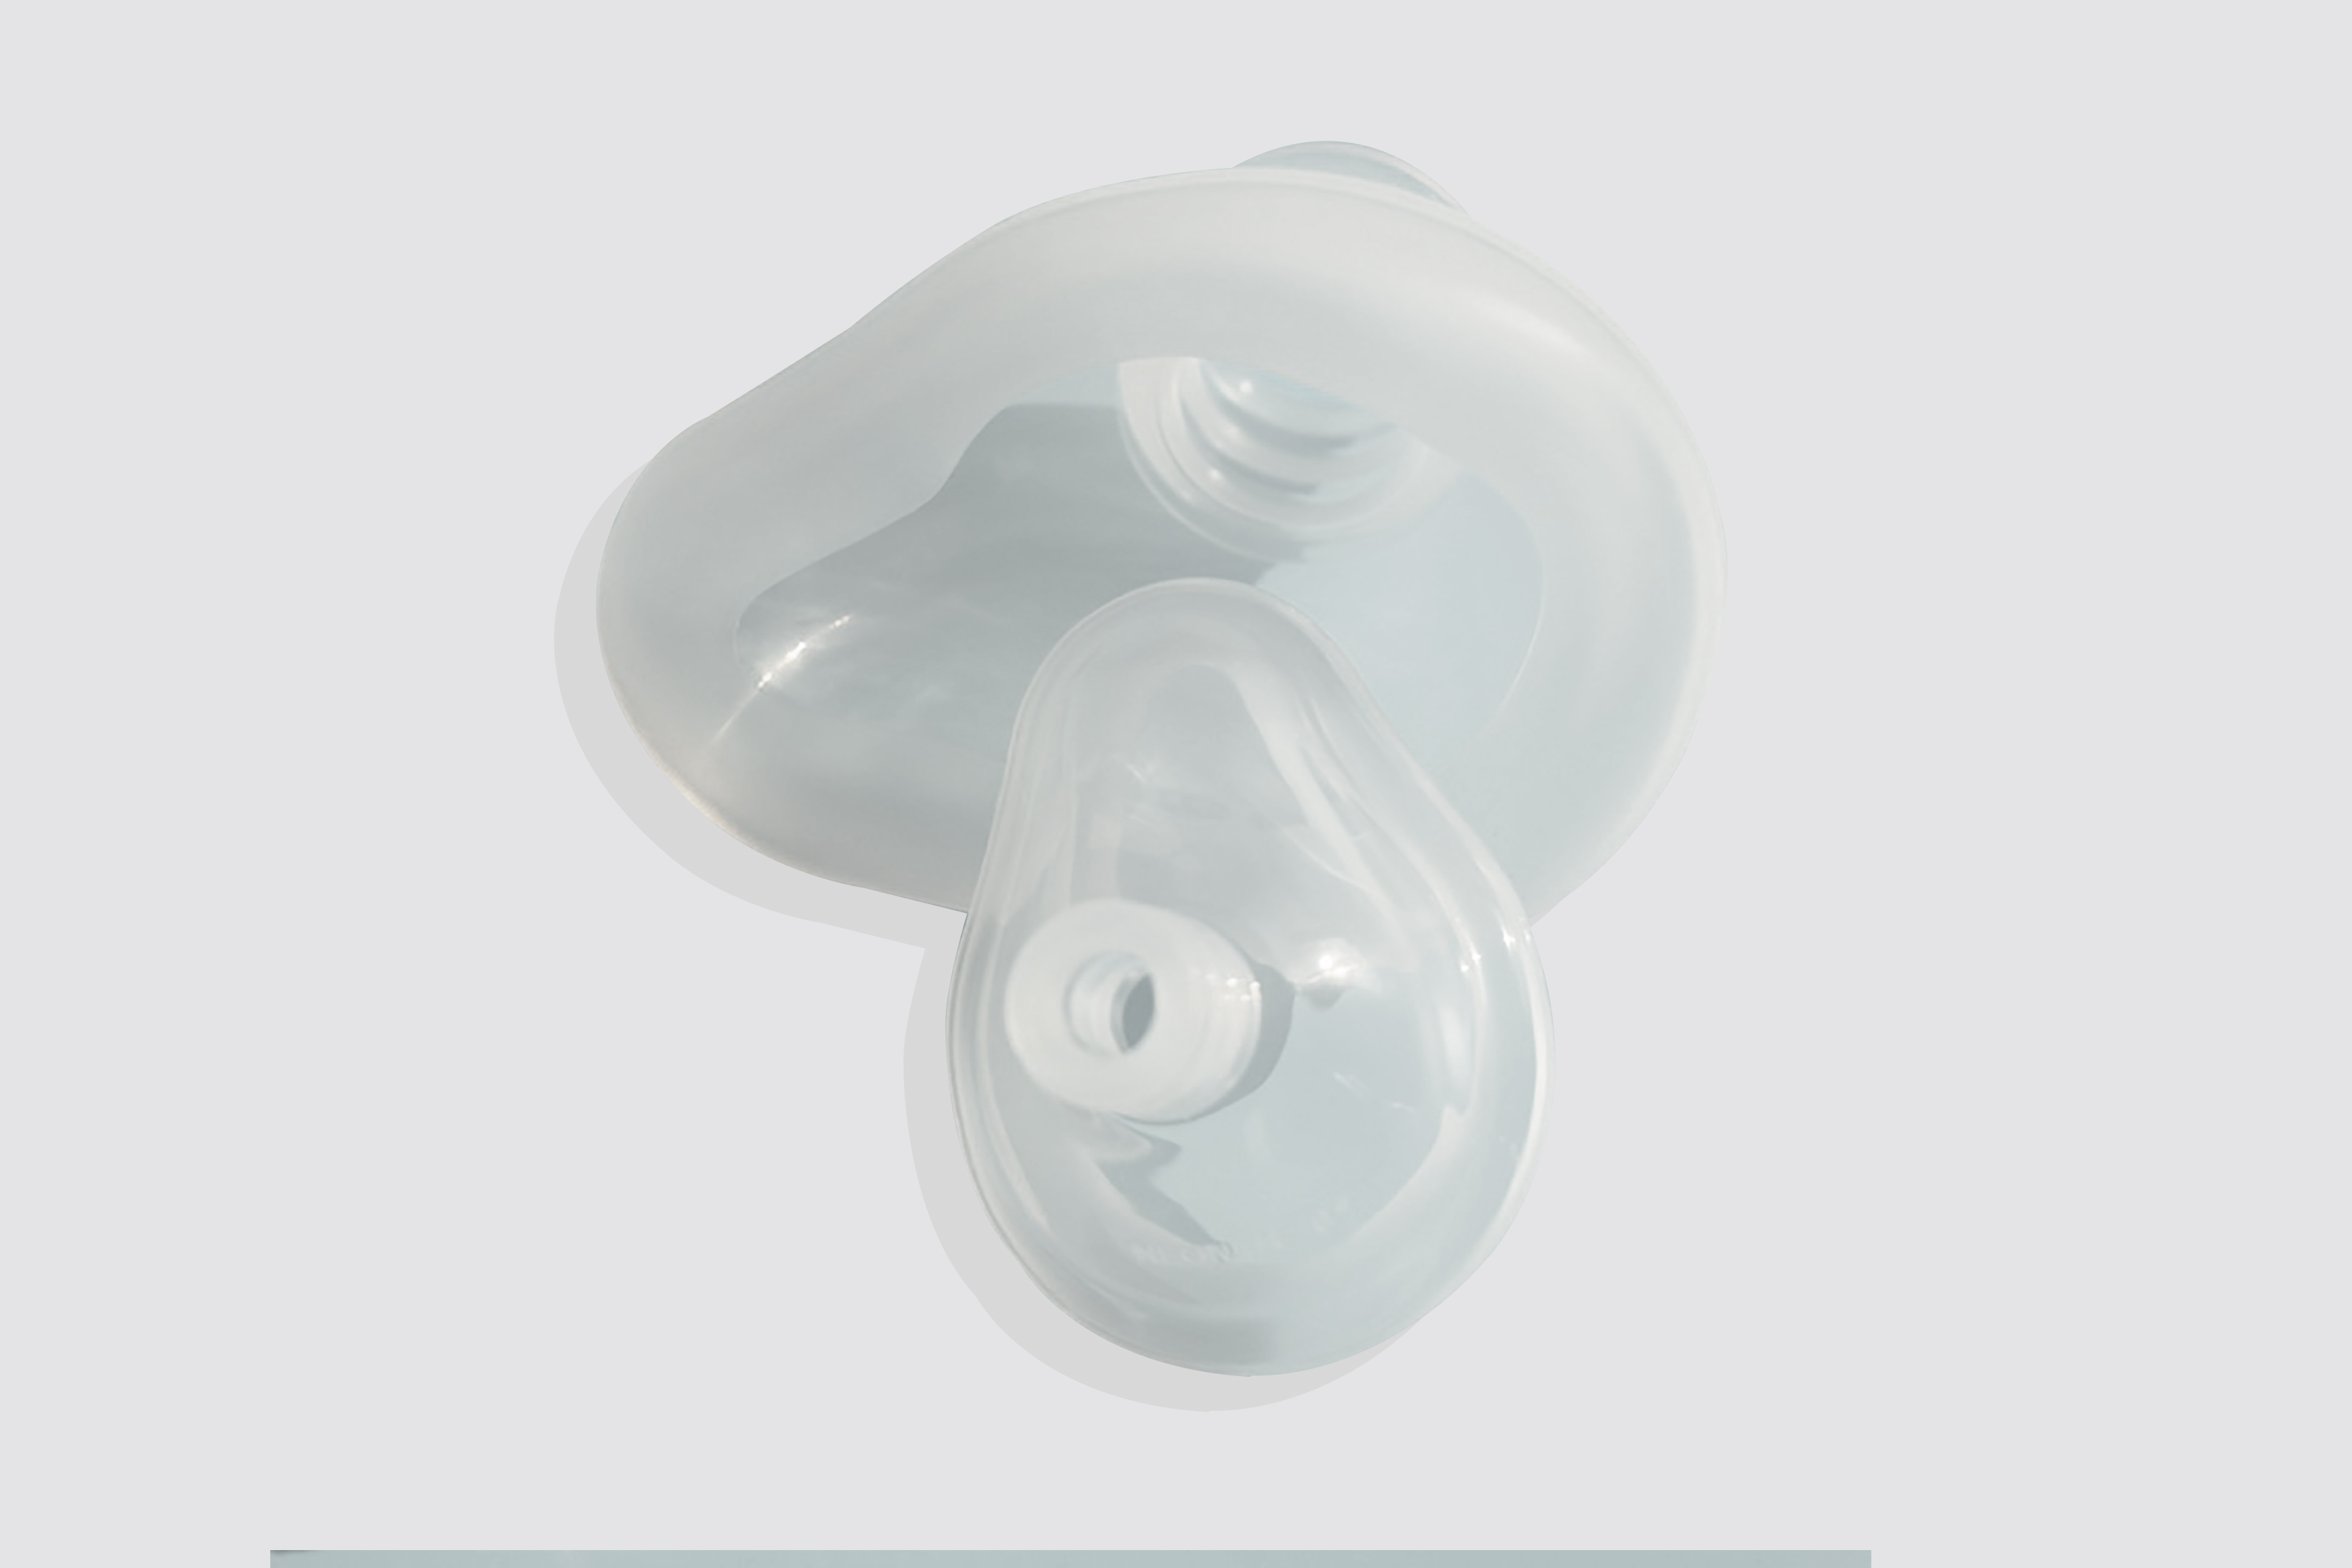 Silicone mask of anesthesia machine respirator for medical